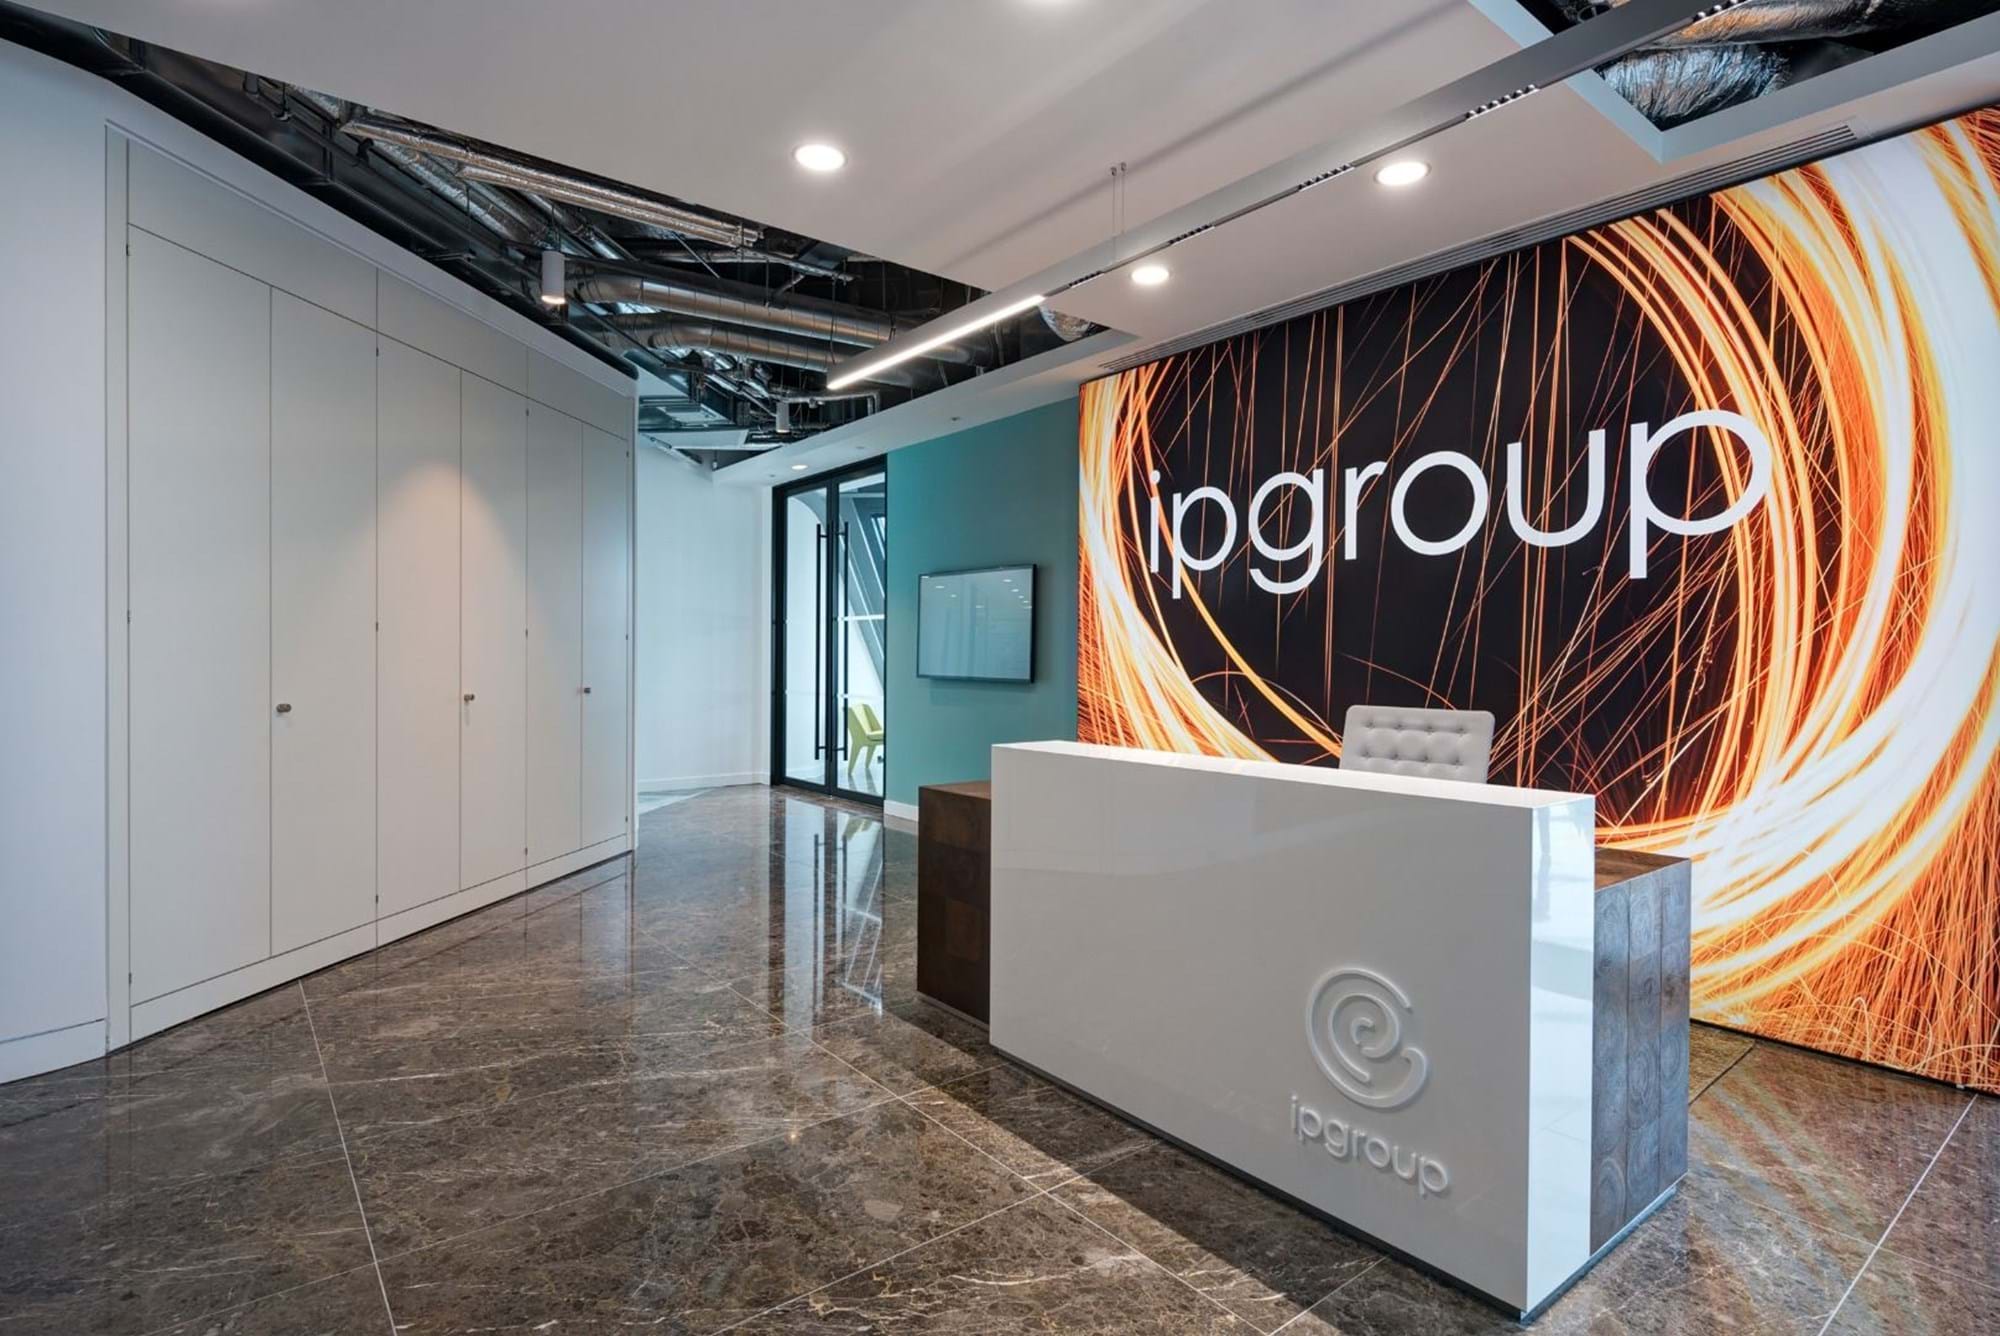 Modus Workspace office design, fit out and refurbishment - IPG - IPG 02 highres sRGB.jpg